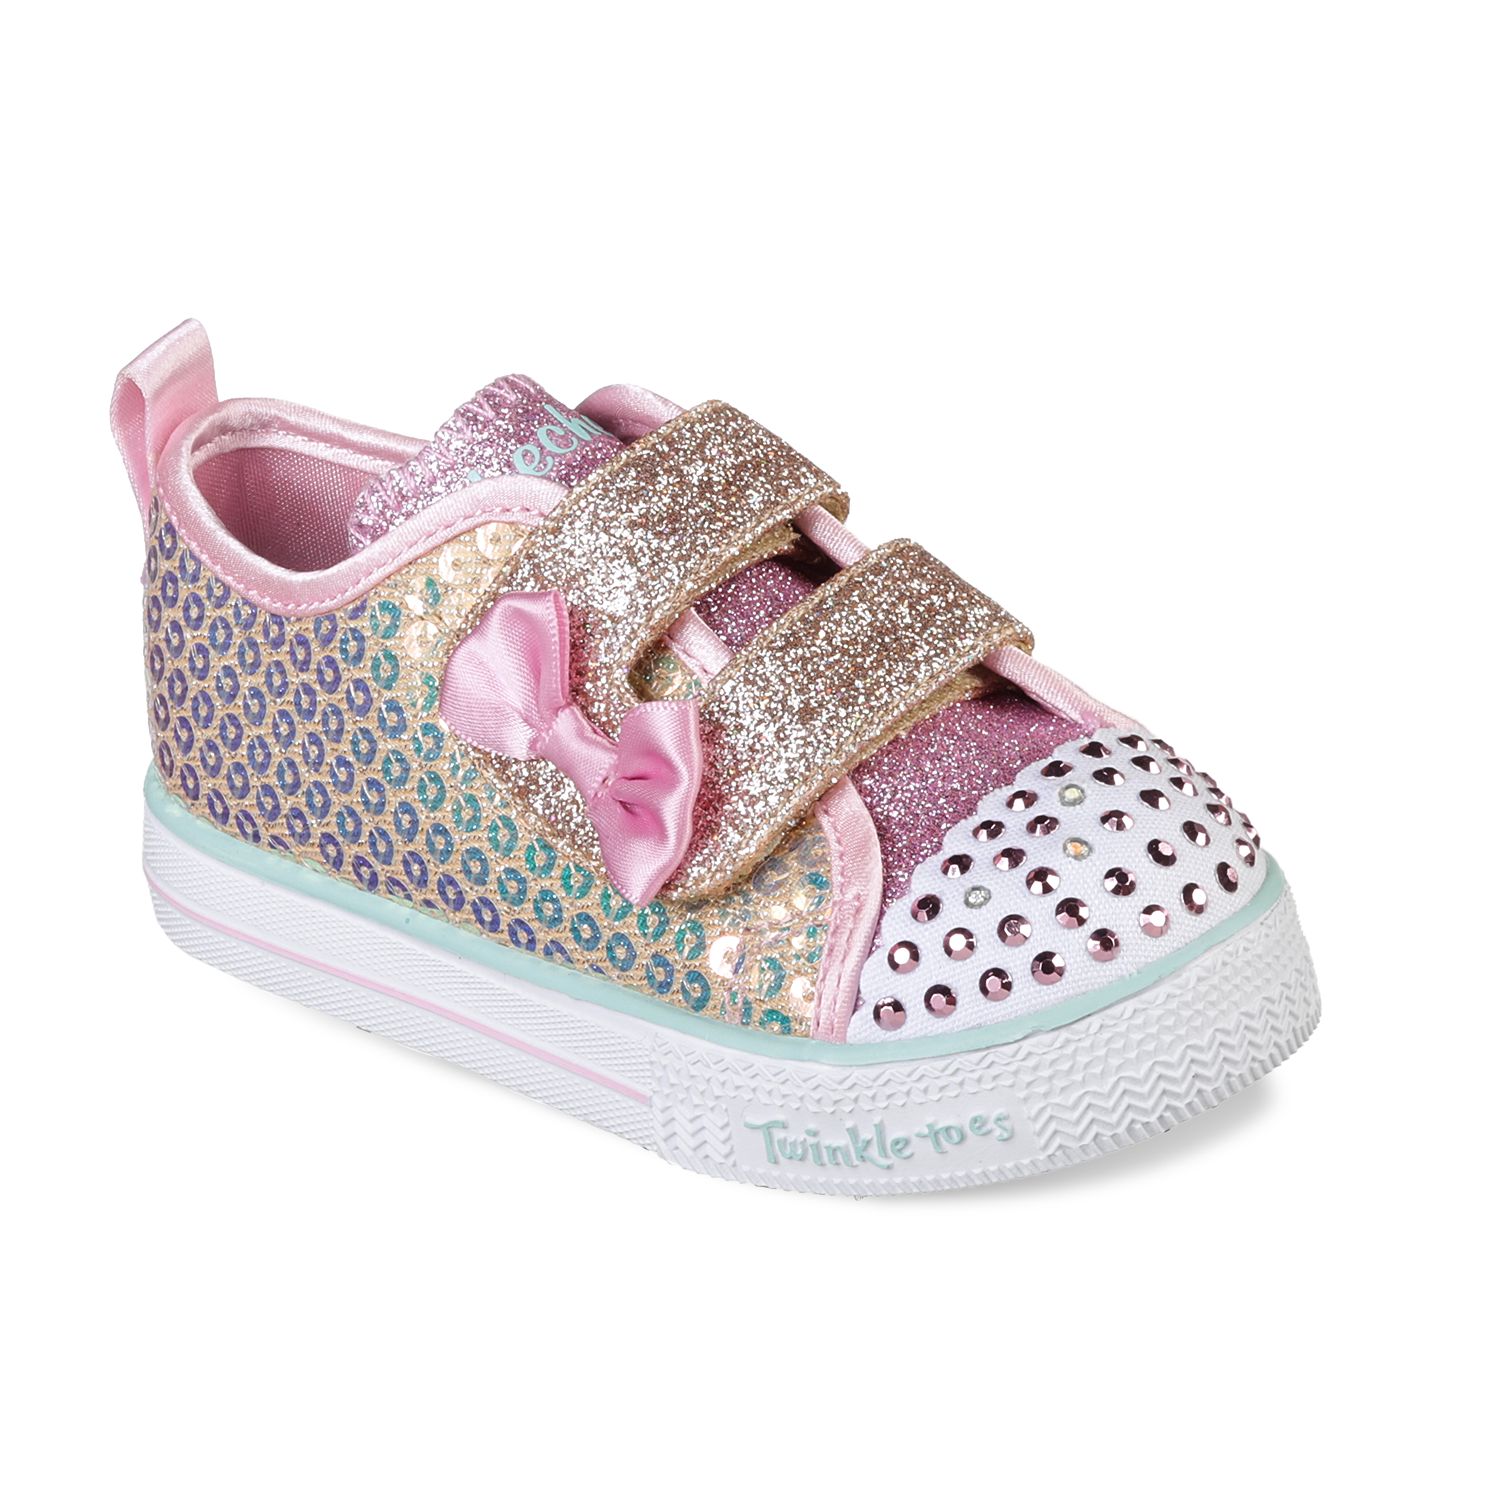 skechers twinkle toes light up size 10